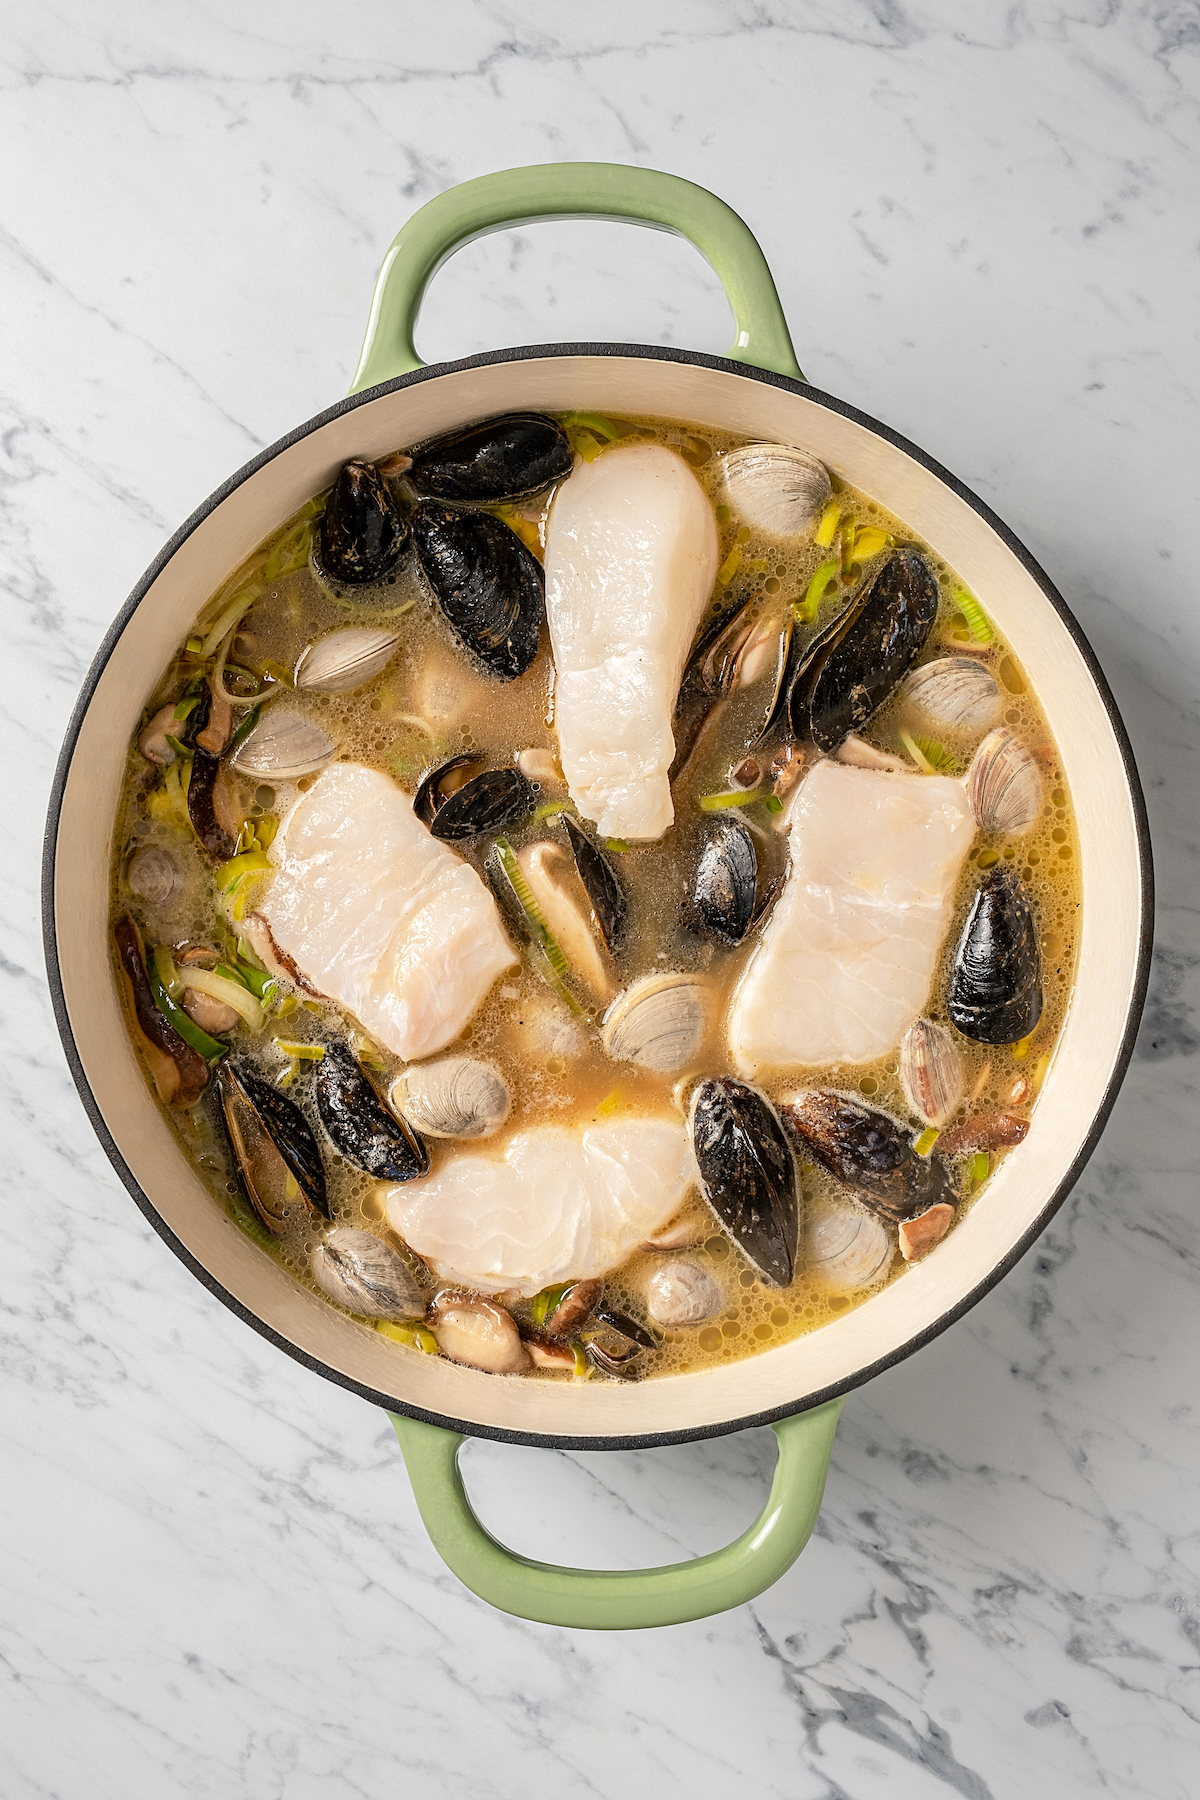 Shellfish and white fish cooking in a pot.